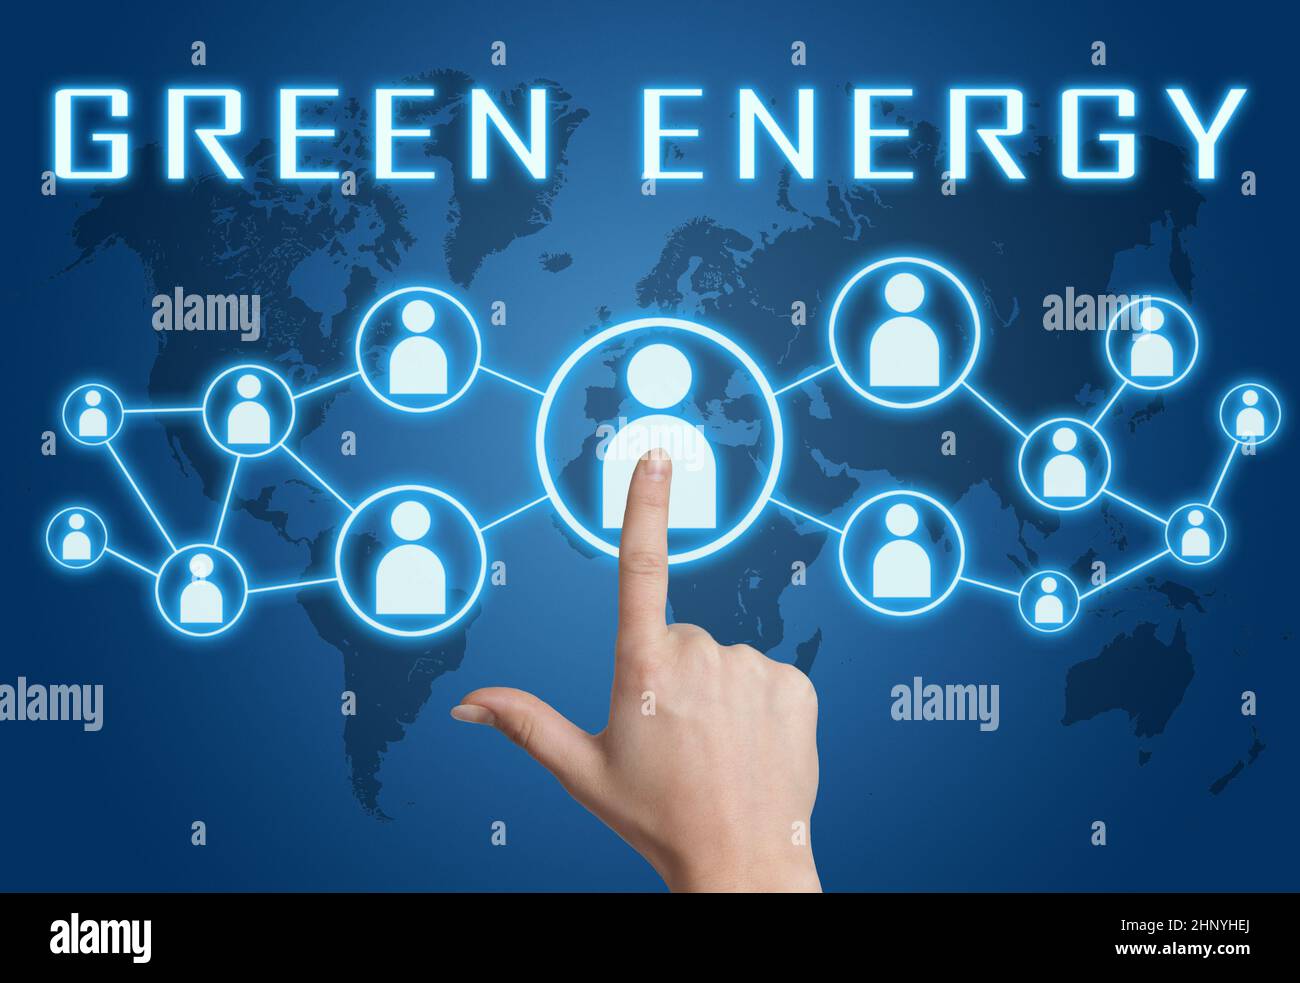 Green Energy - text concept with hand pressing social icons on blue world map background. Stock Photo